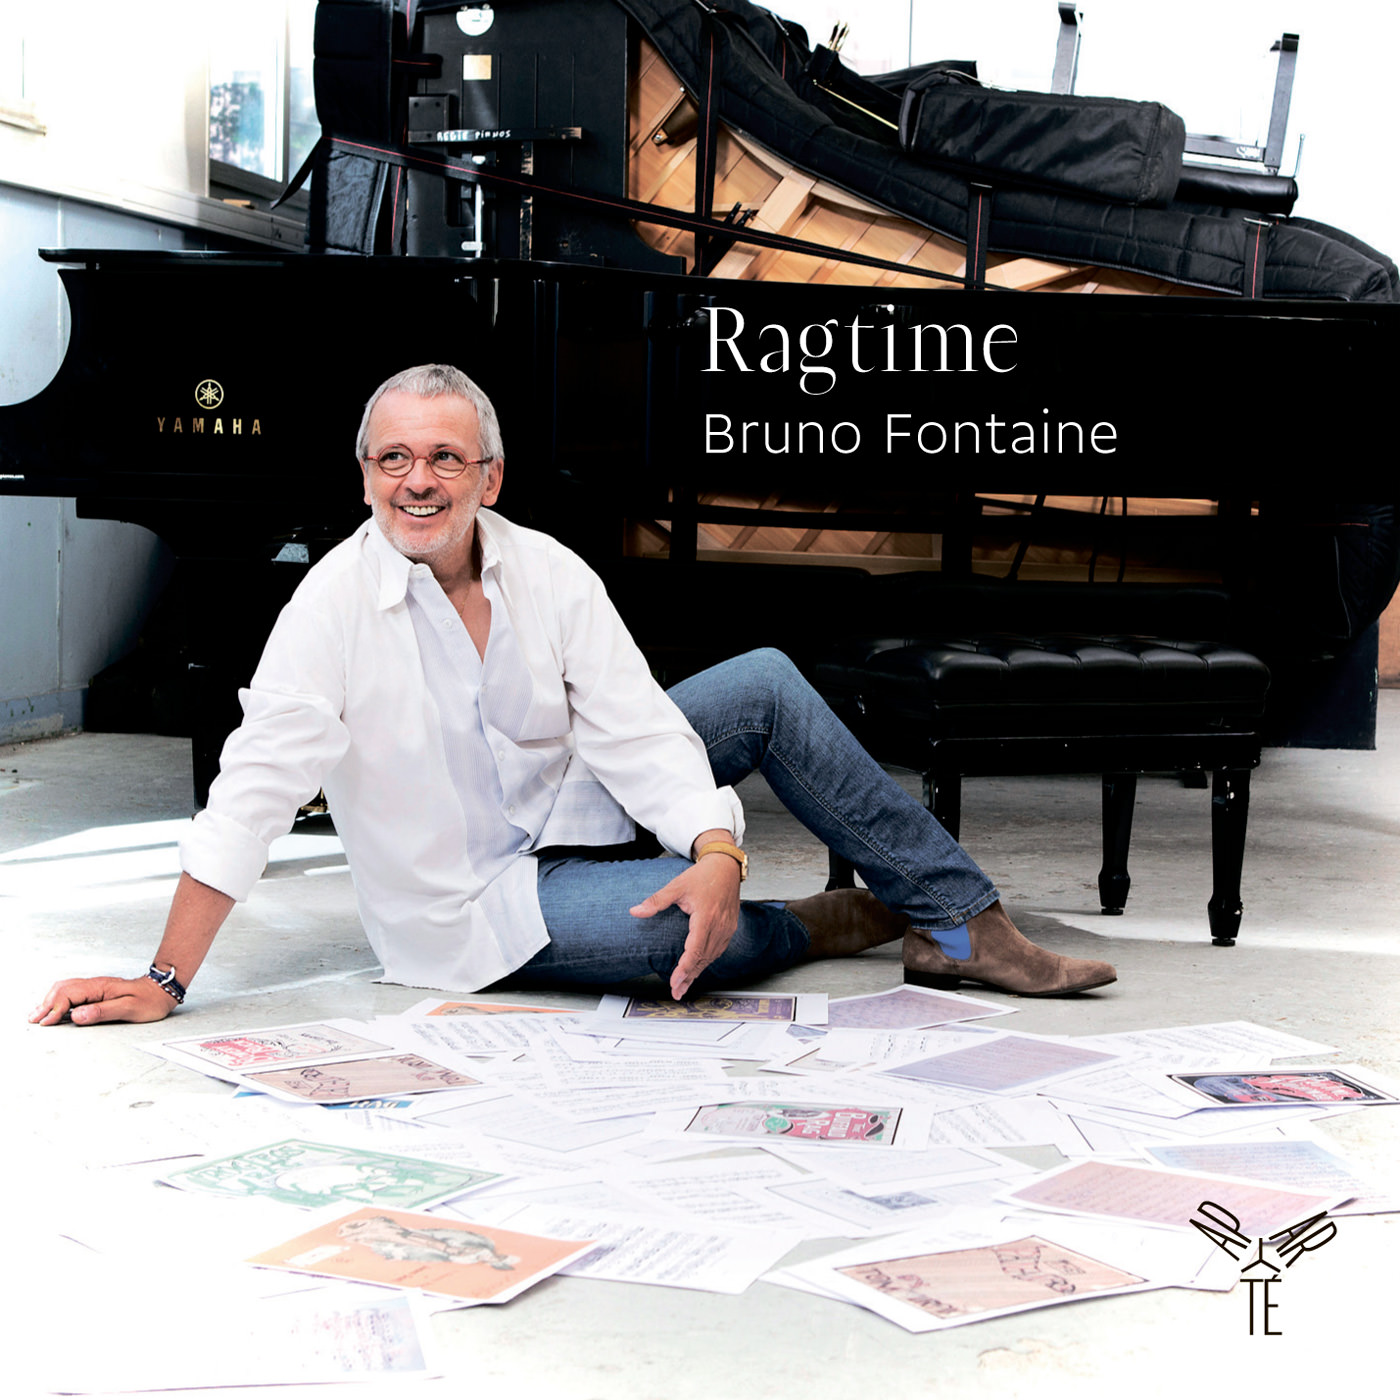 Bruno Fontaine - Ragtime {Deluxe 5.1 Edition} (2013/2014) [Qobuz FLAC 5.1 Surround 24bit/96kHz]